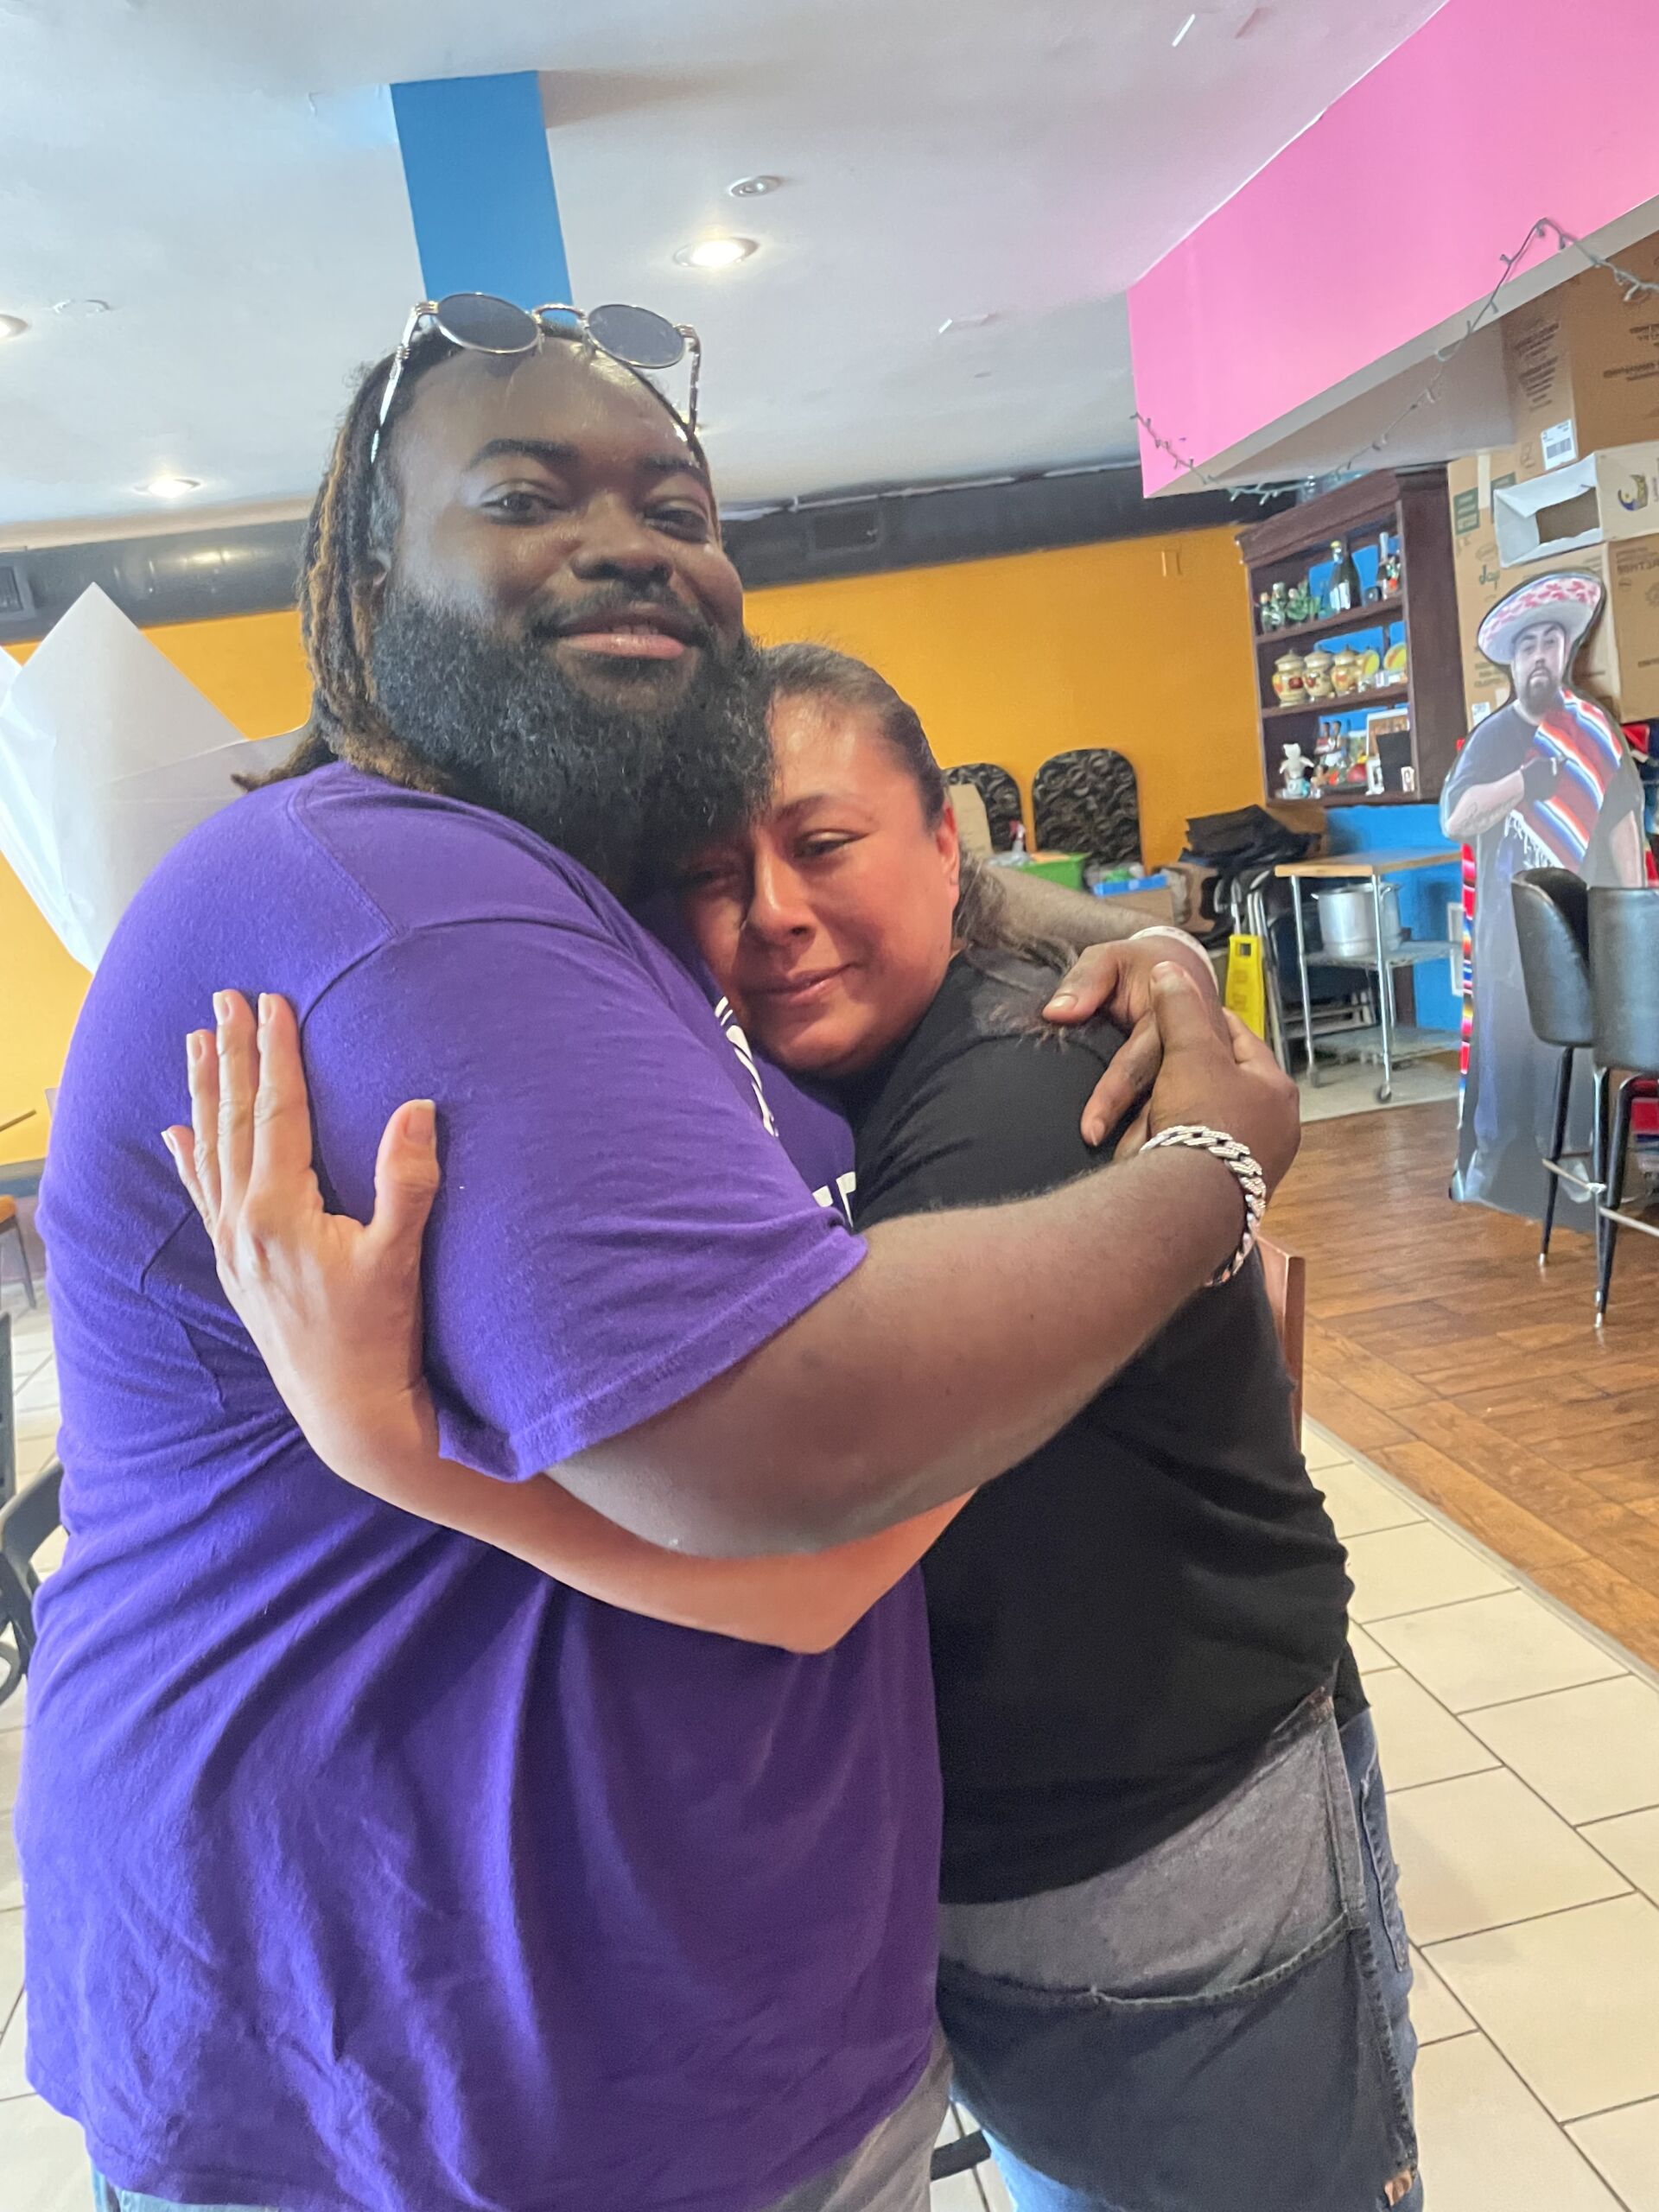 Photo shows Golder College Prep's band director Laurente Oby hugging Myrna Mendia, a parent at Golder. They are standing in the Mendia family's restaurant El Tezcal.